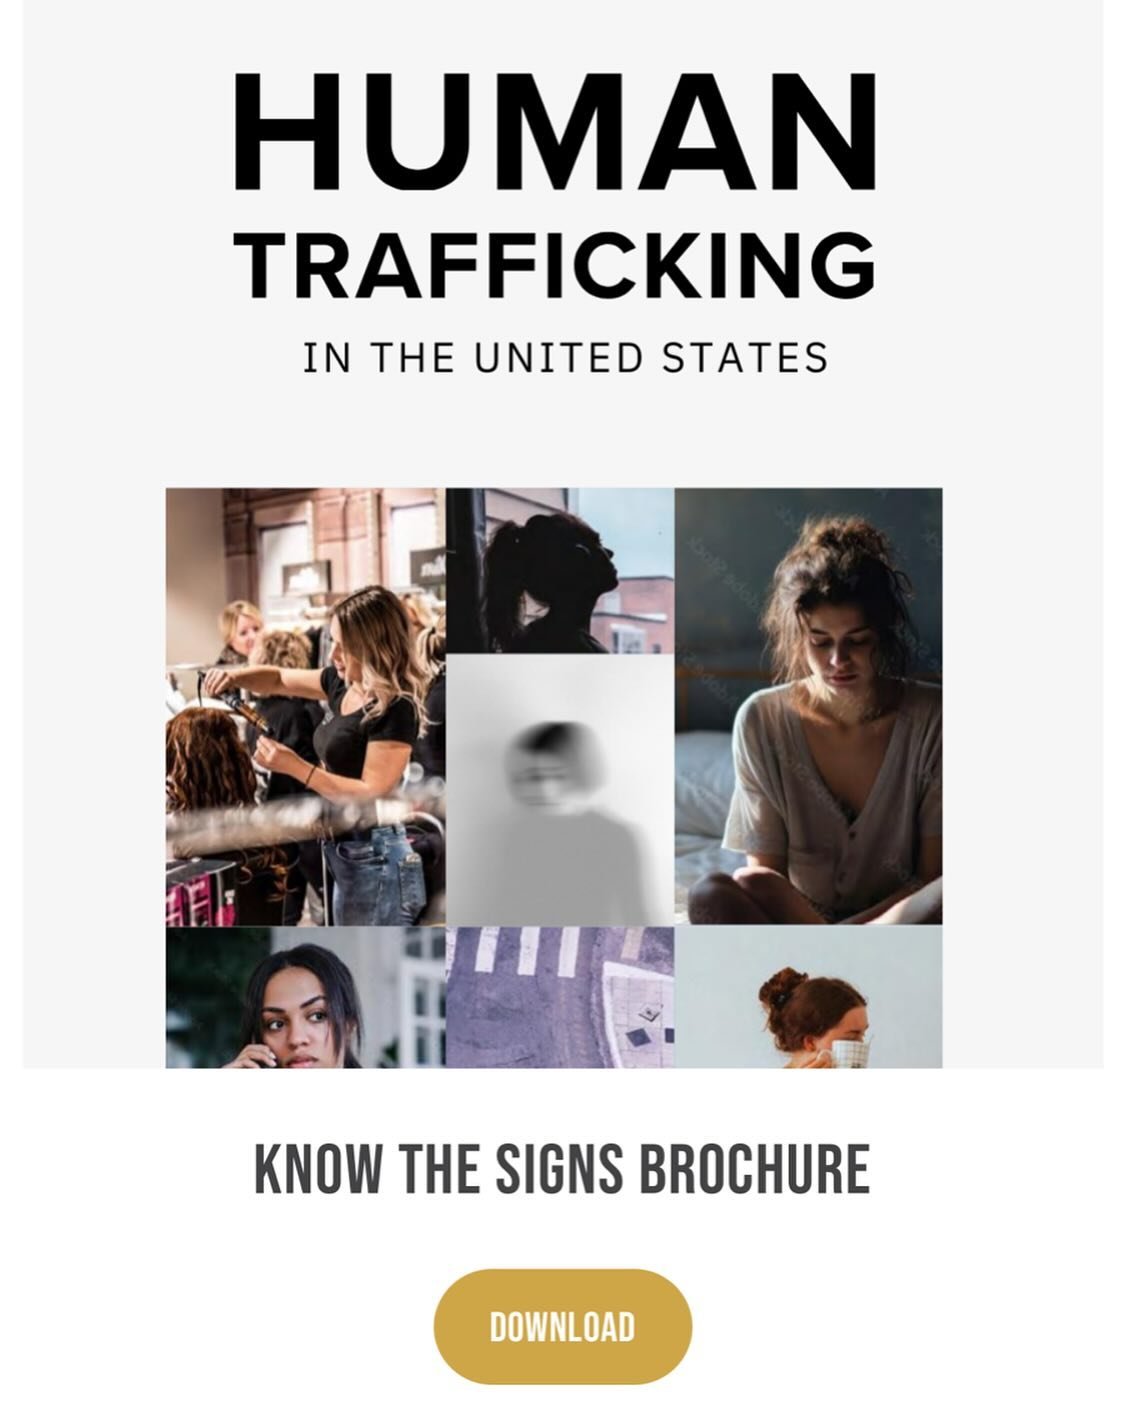 Did you know we have downloadable content on our website to further your education on how you can be an advocate for human trafficking survivors? 
&bull;
Visit https://www.northstarinitiative.org/resources to download NSI Brochures, find a list of bo